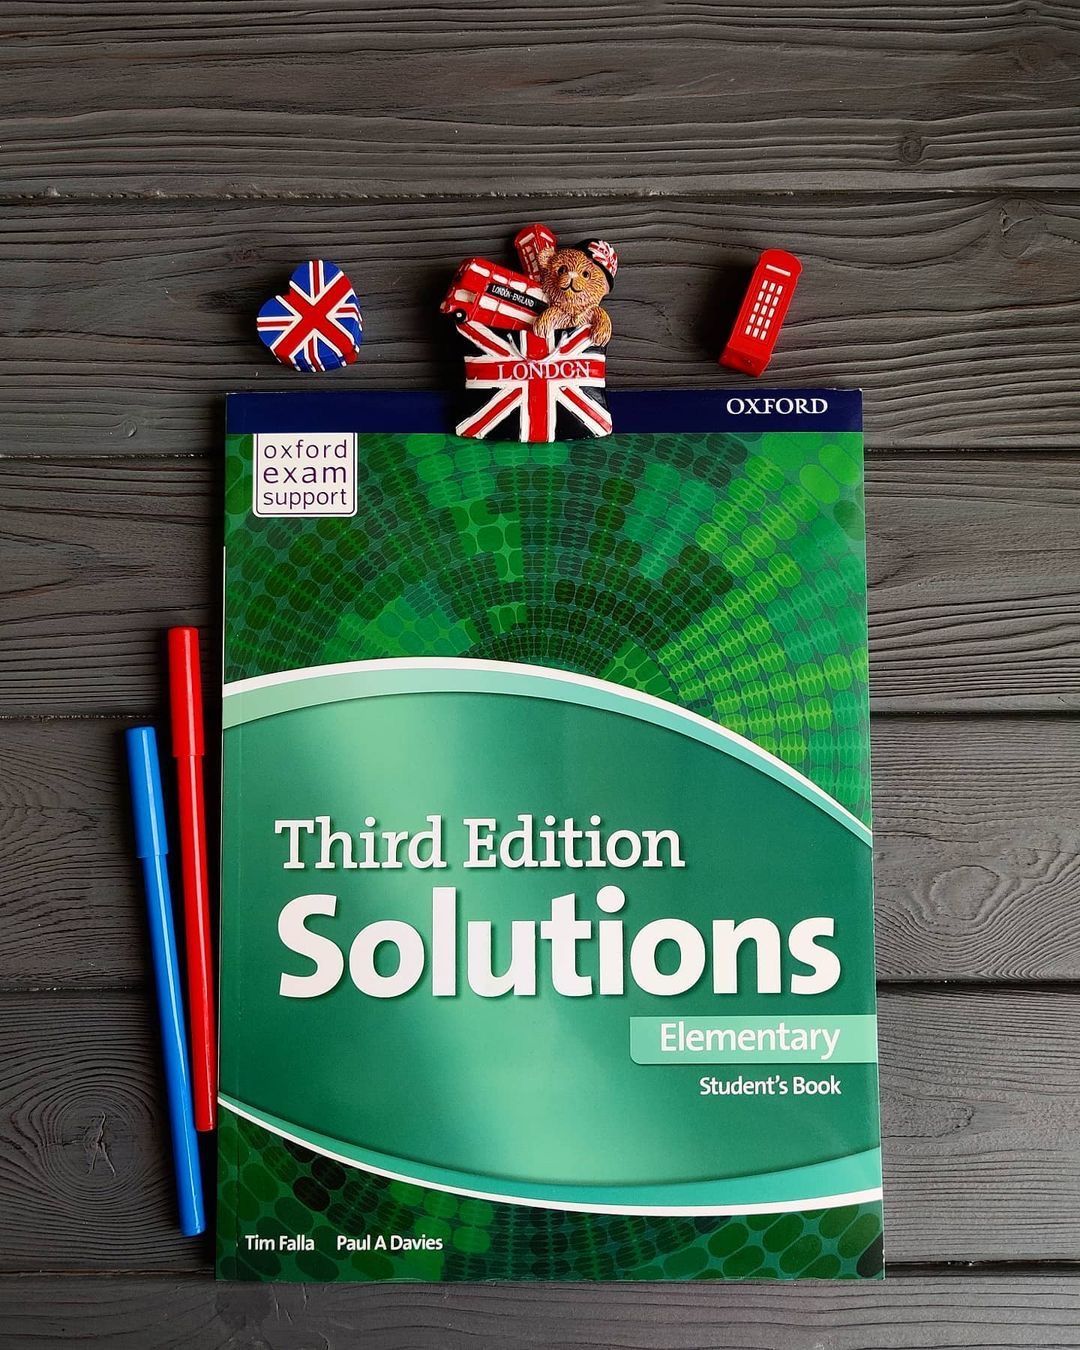 Solution elementary students book 3rd edition. Solutions учебник. Solution Elementary students book 3 Edition.